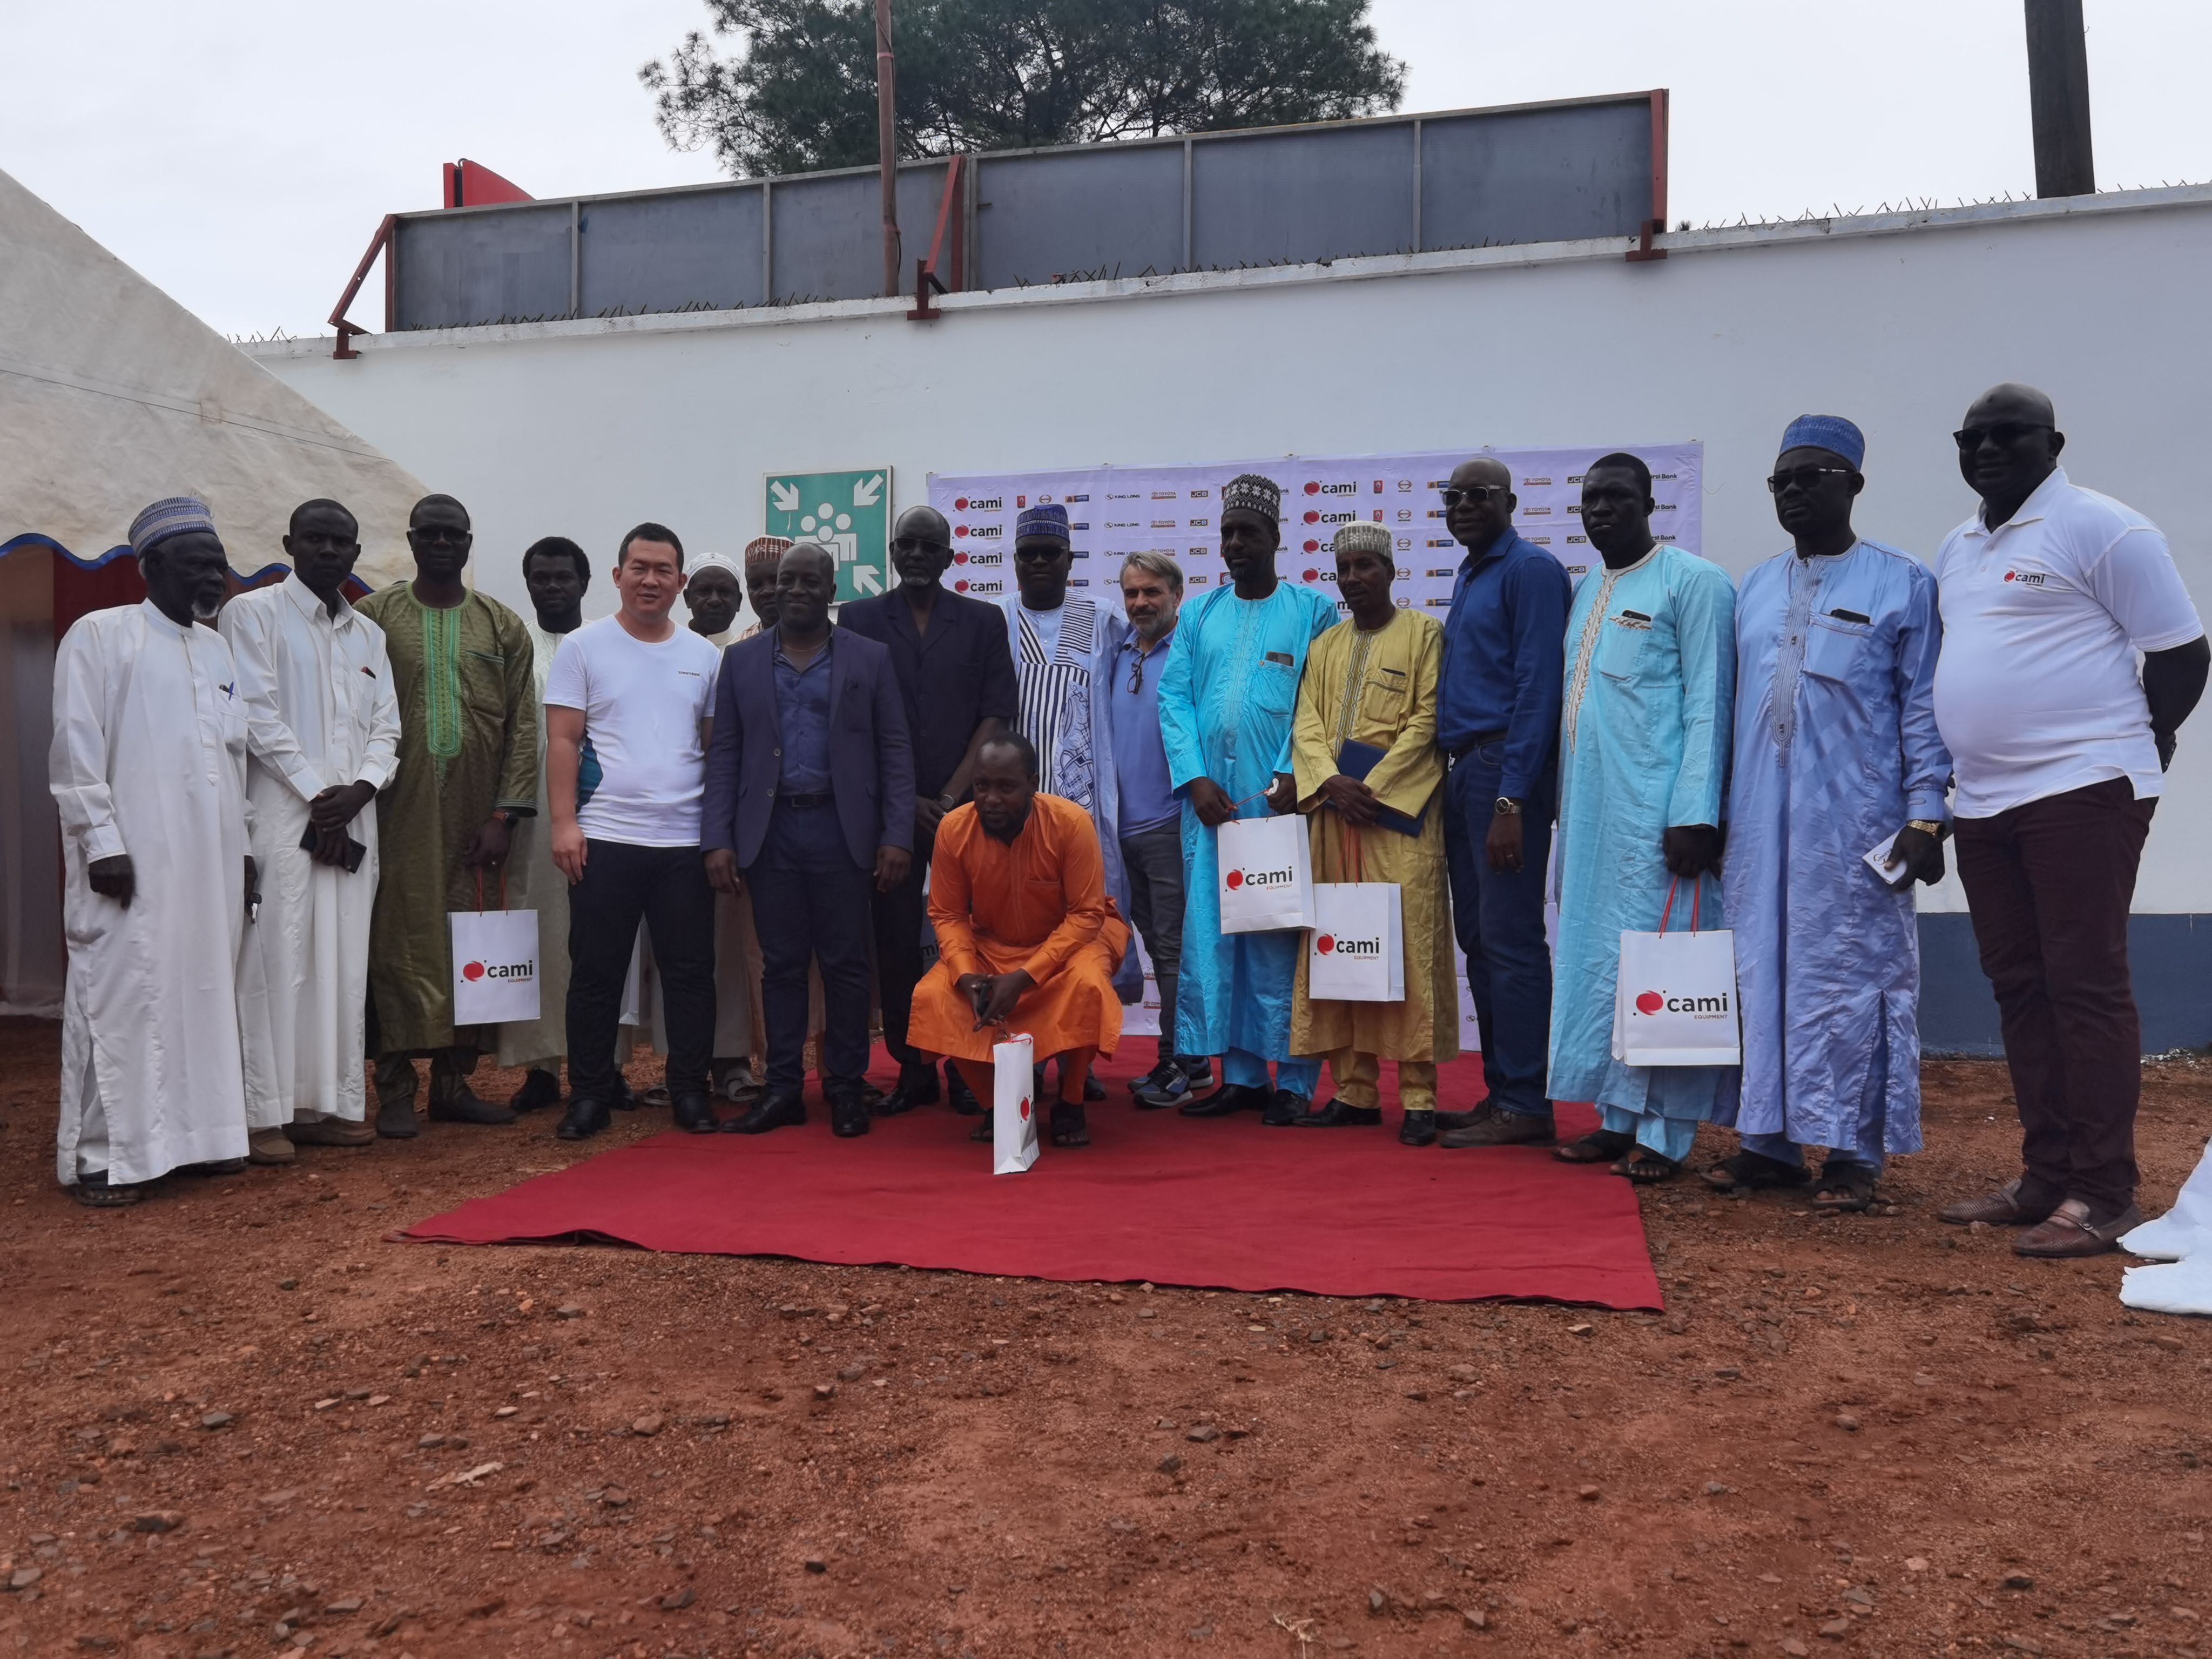 HOHAN dealer CAMEROON MOTORS INDUSTRIES (CAMI) SA held a tour event on September 14, 2022 in the important northern city Ngaoundere. GTTC Transportation Association members were invited to the event